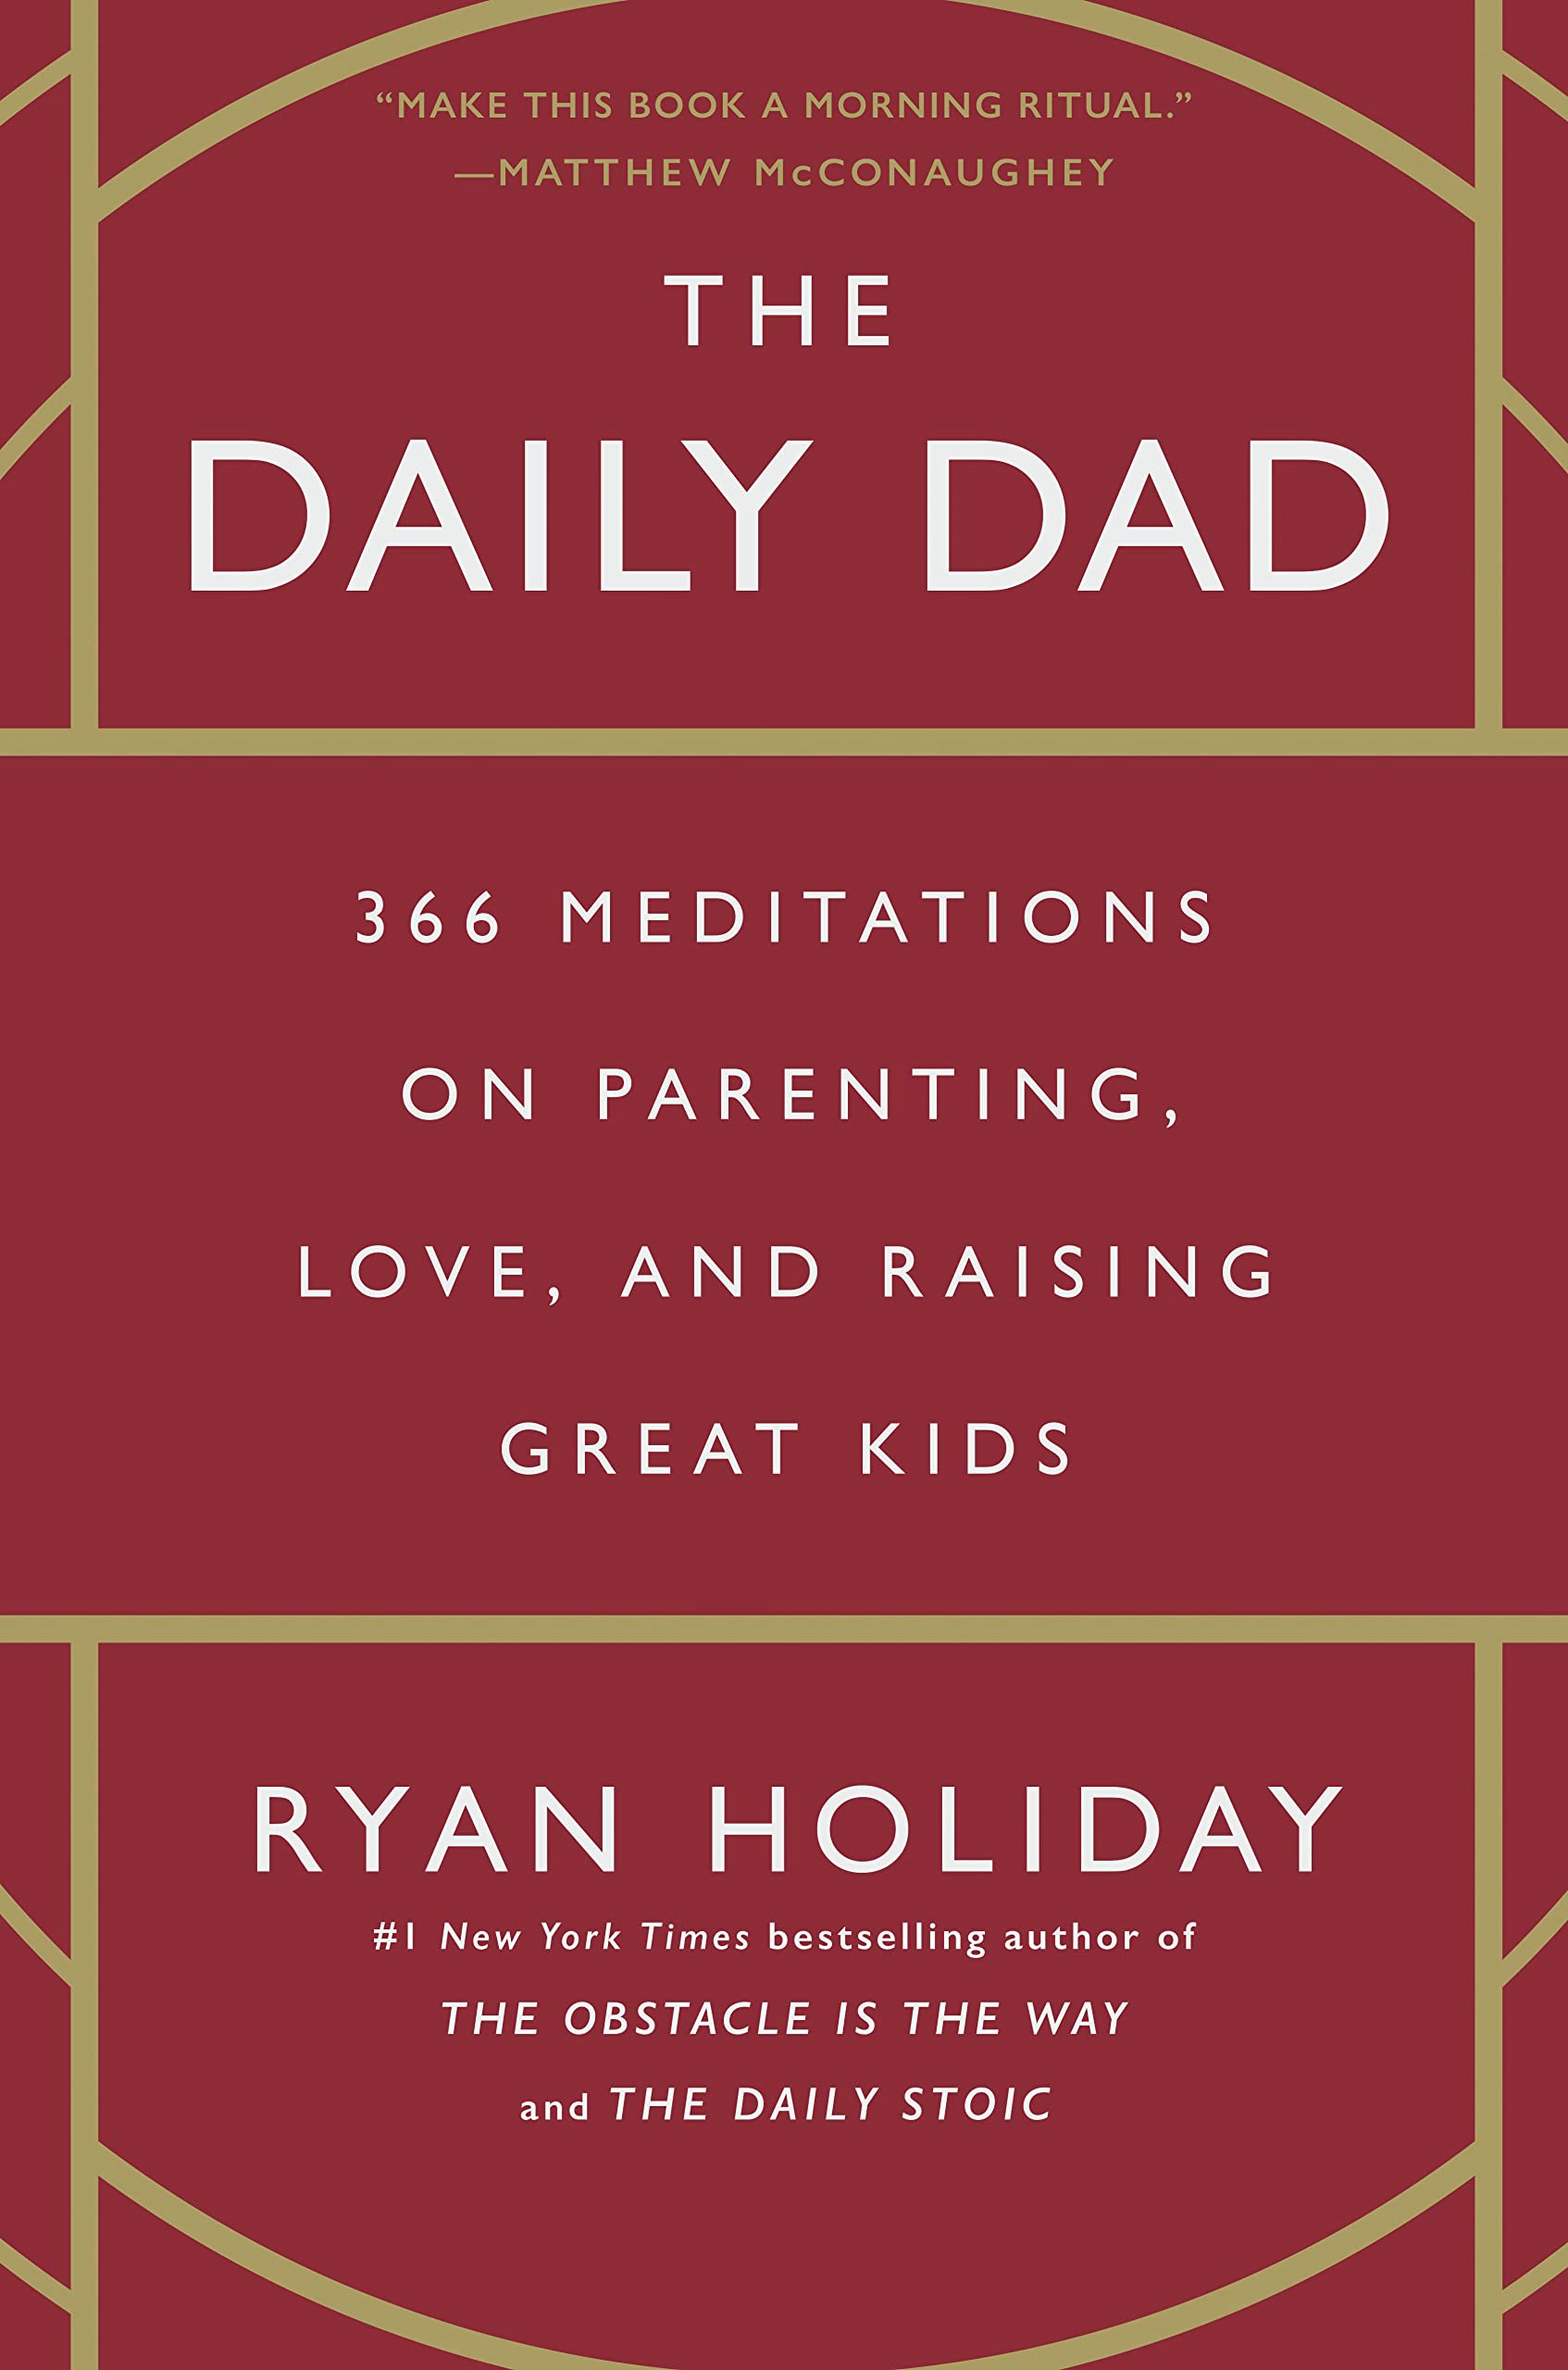 Father's Day Gift Guide by Mitch, Kelly in the City